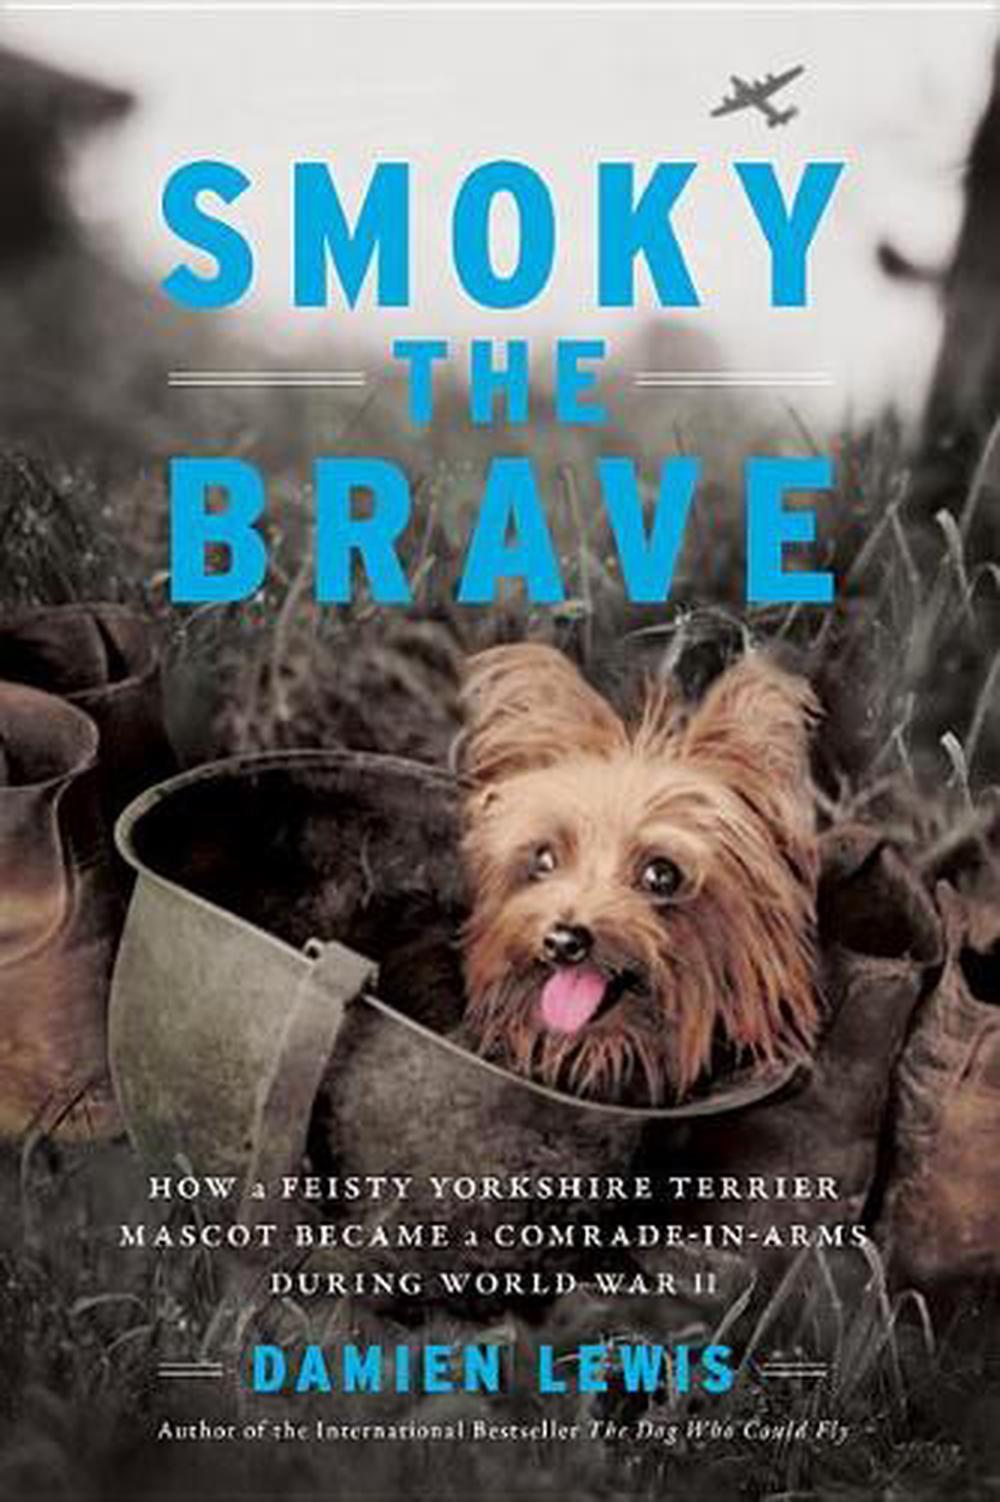 smoky the brave by damien lewis